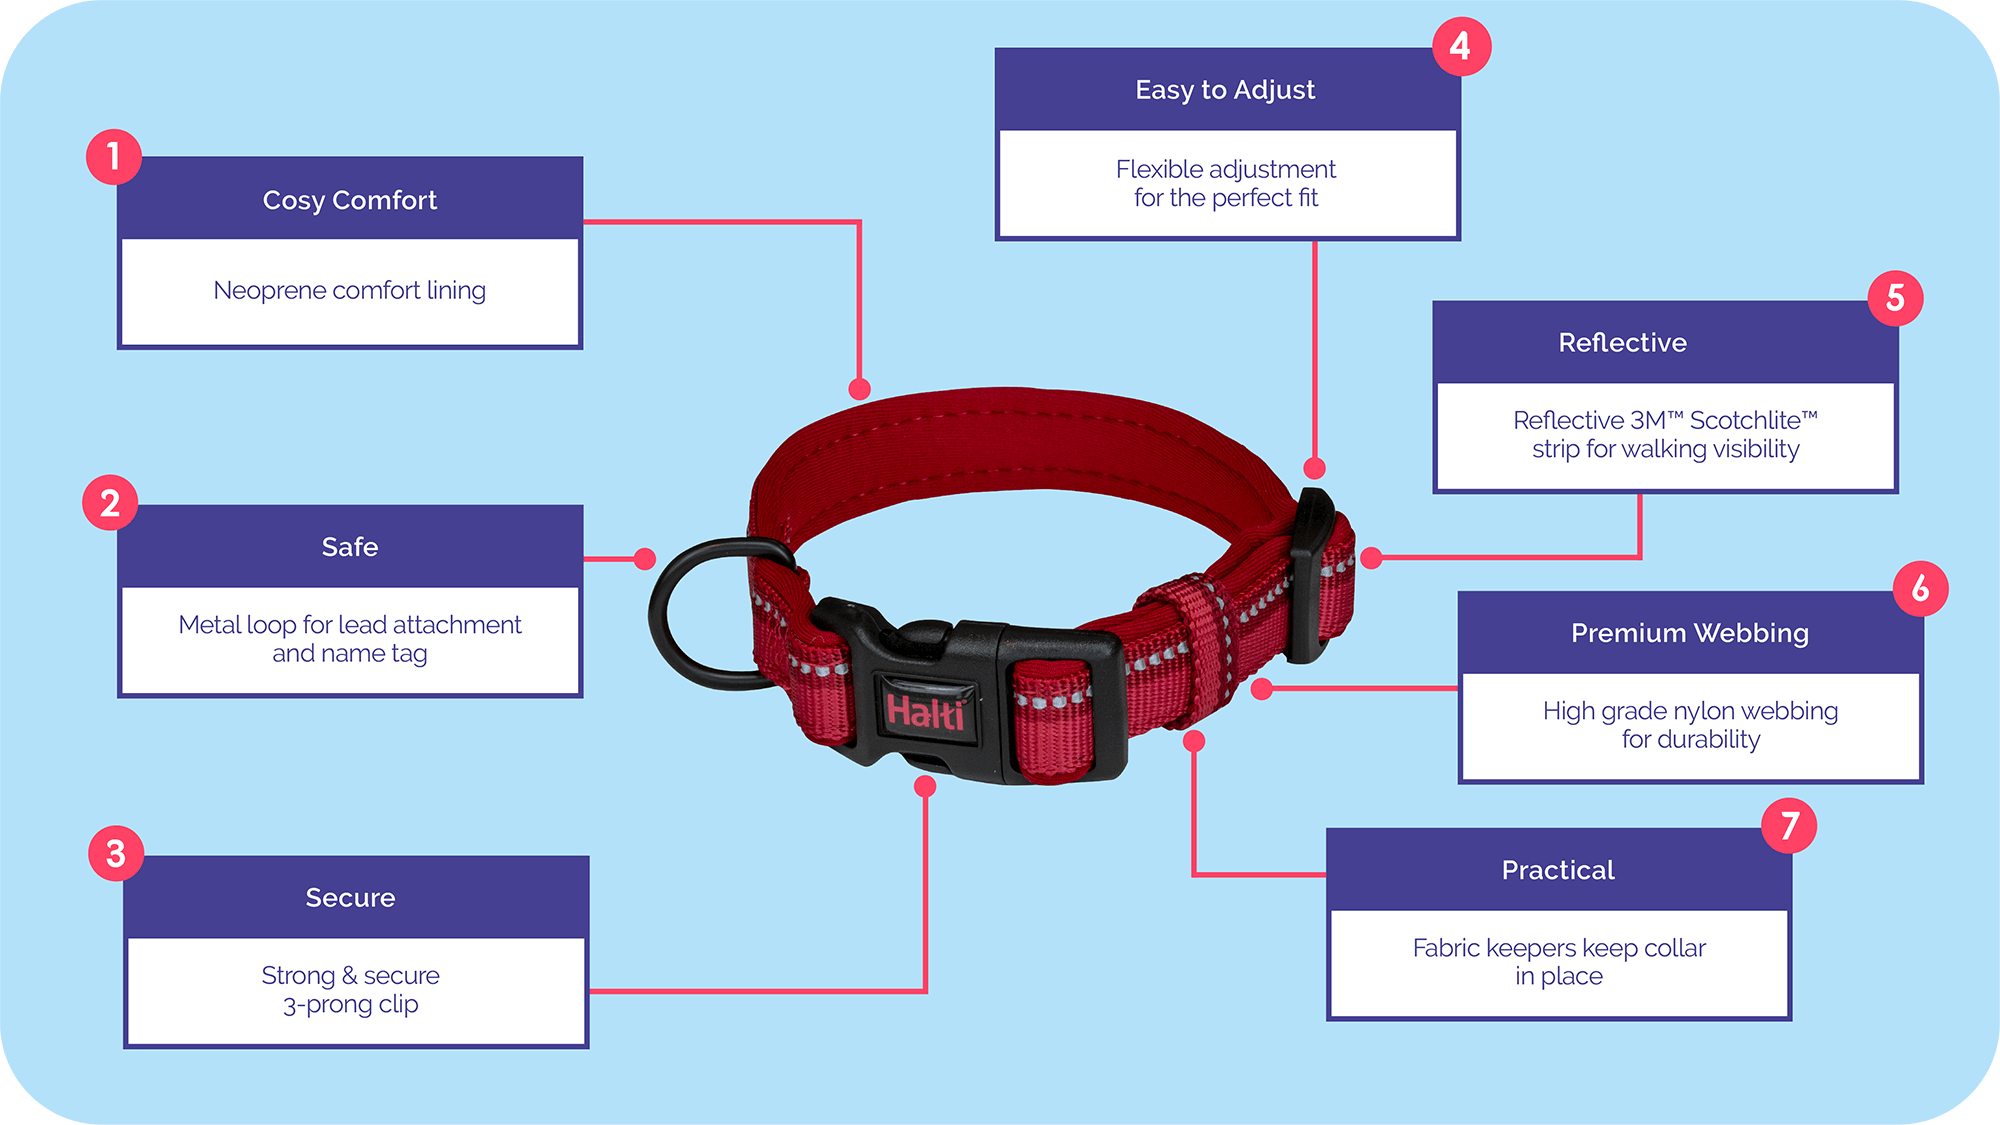 Features guide for the Halti comfort collar